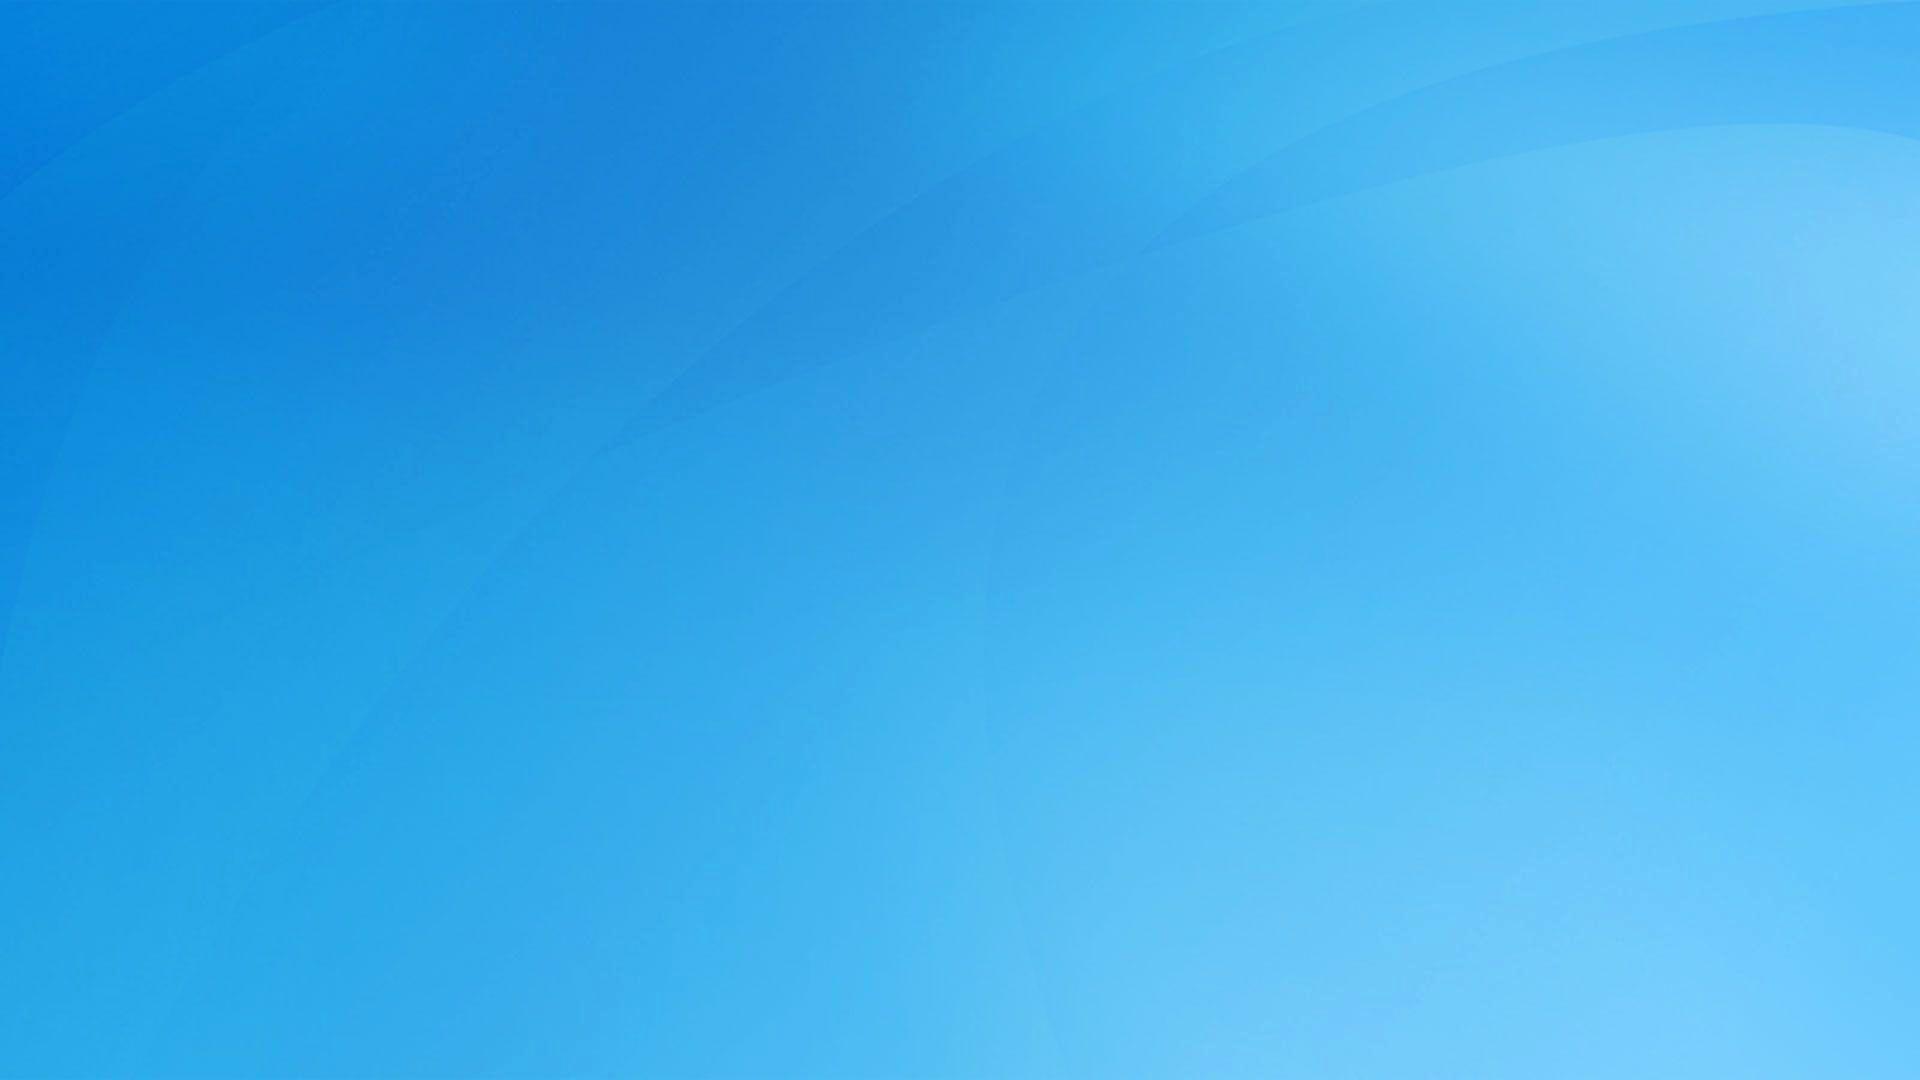 Roblox Blue Wallpapers Top Free Roblox Blue Backgrounds Wallpaperaccess - blue roblox background